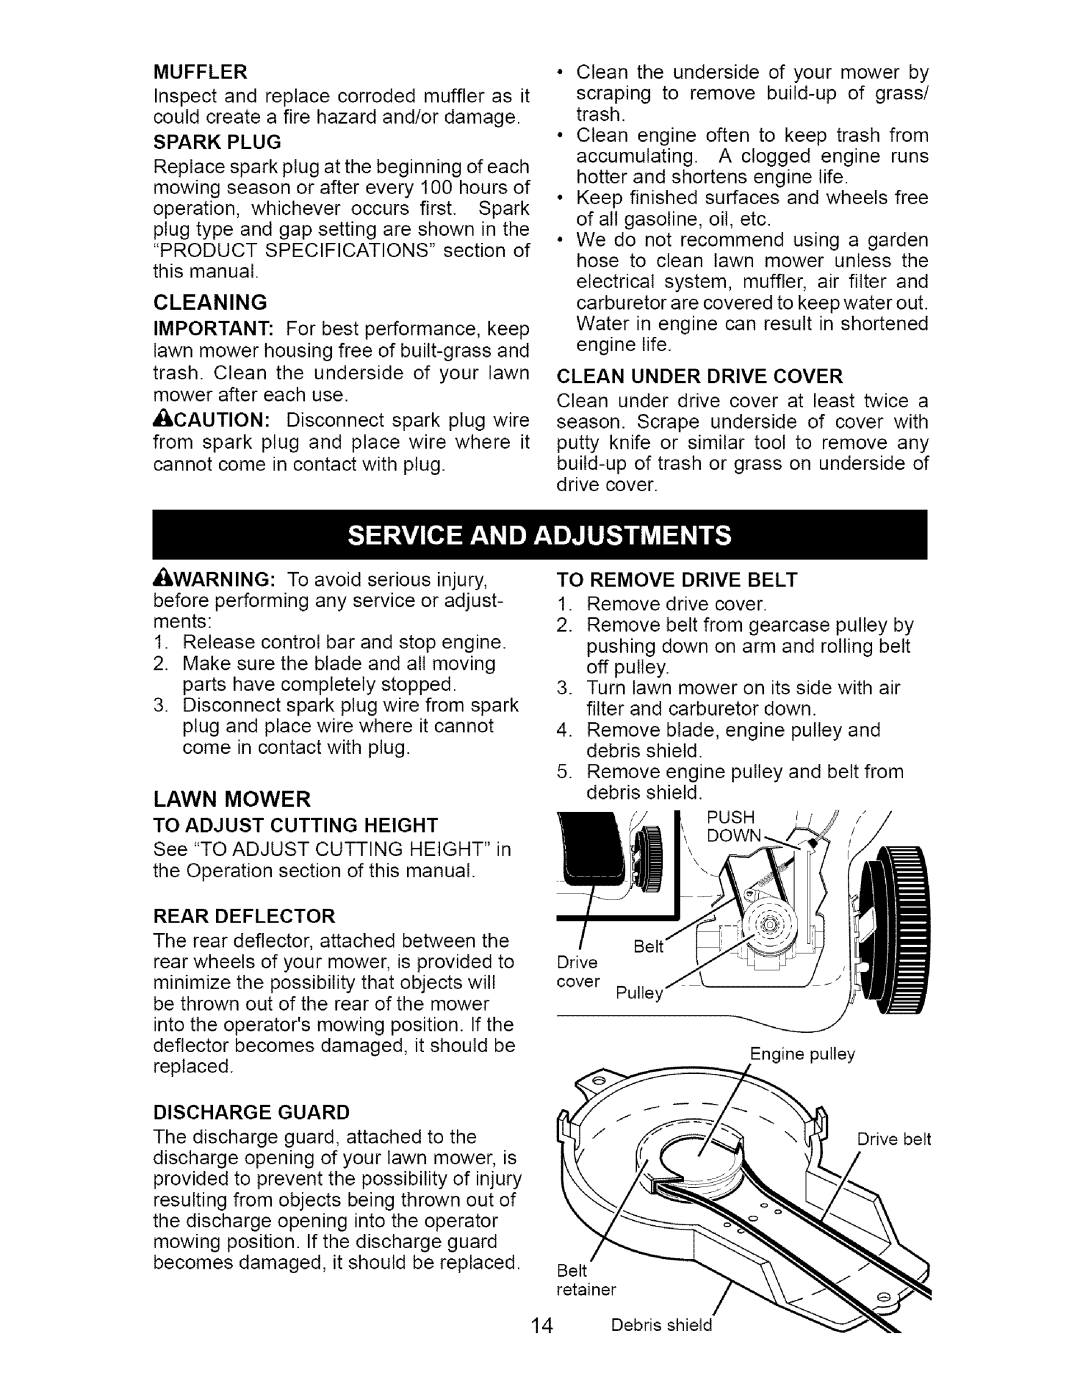 Craftsman 917.37561 owner manual Muffler, Cleaning, To Remove Drive Belt 